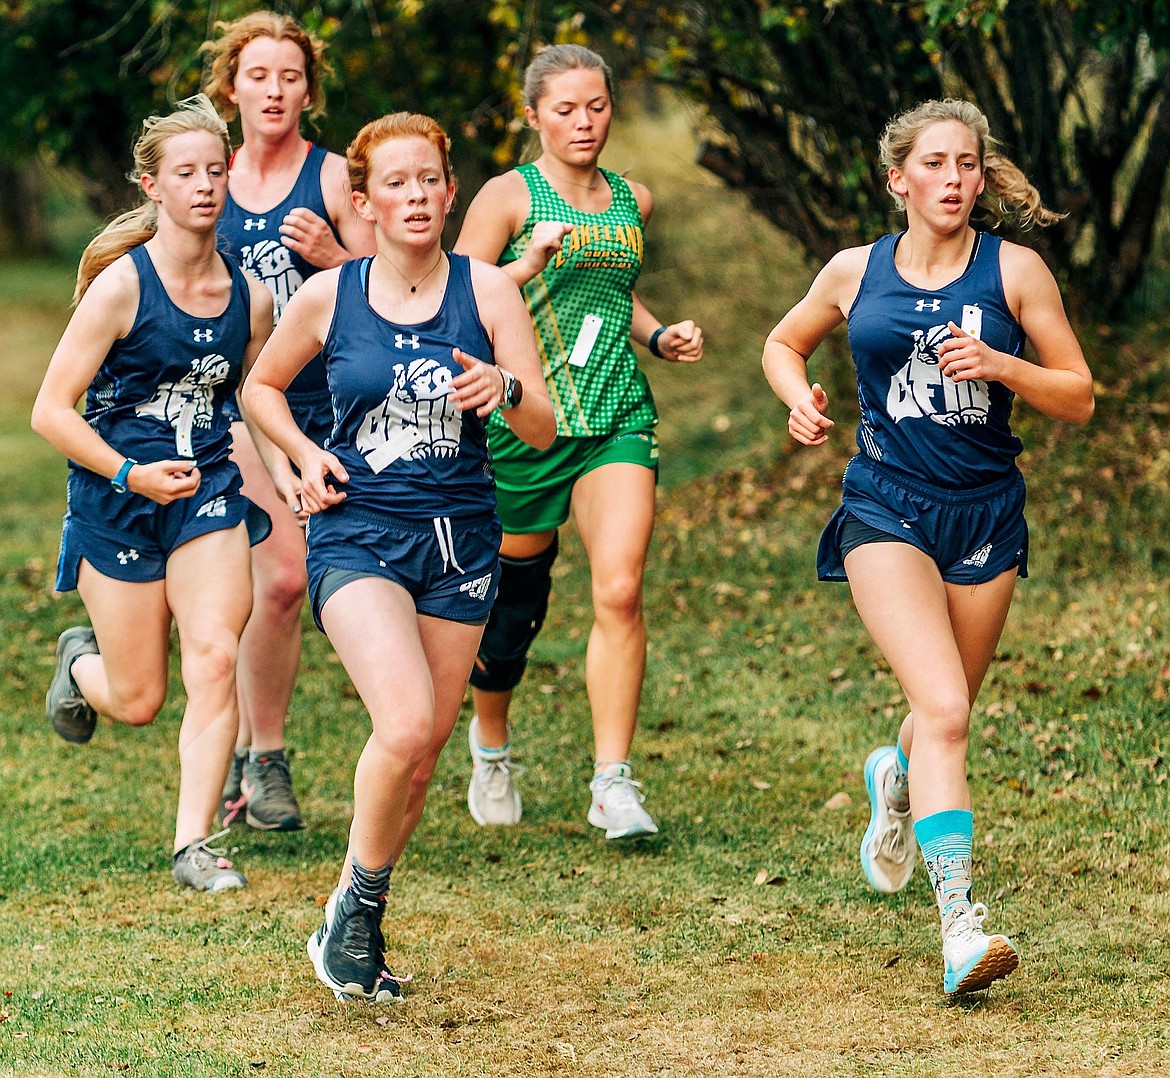 (front two runners left to right) Ceci Roemer and Camille Ussher at cross country meet 2021.